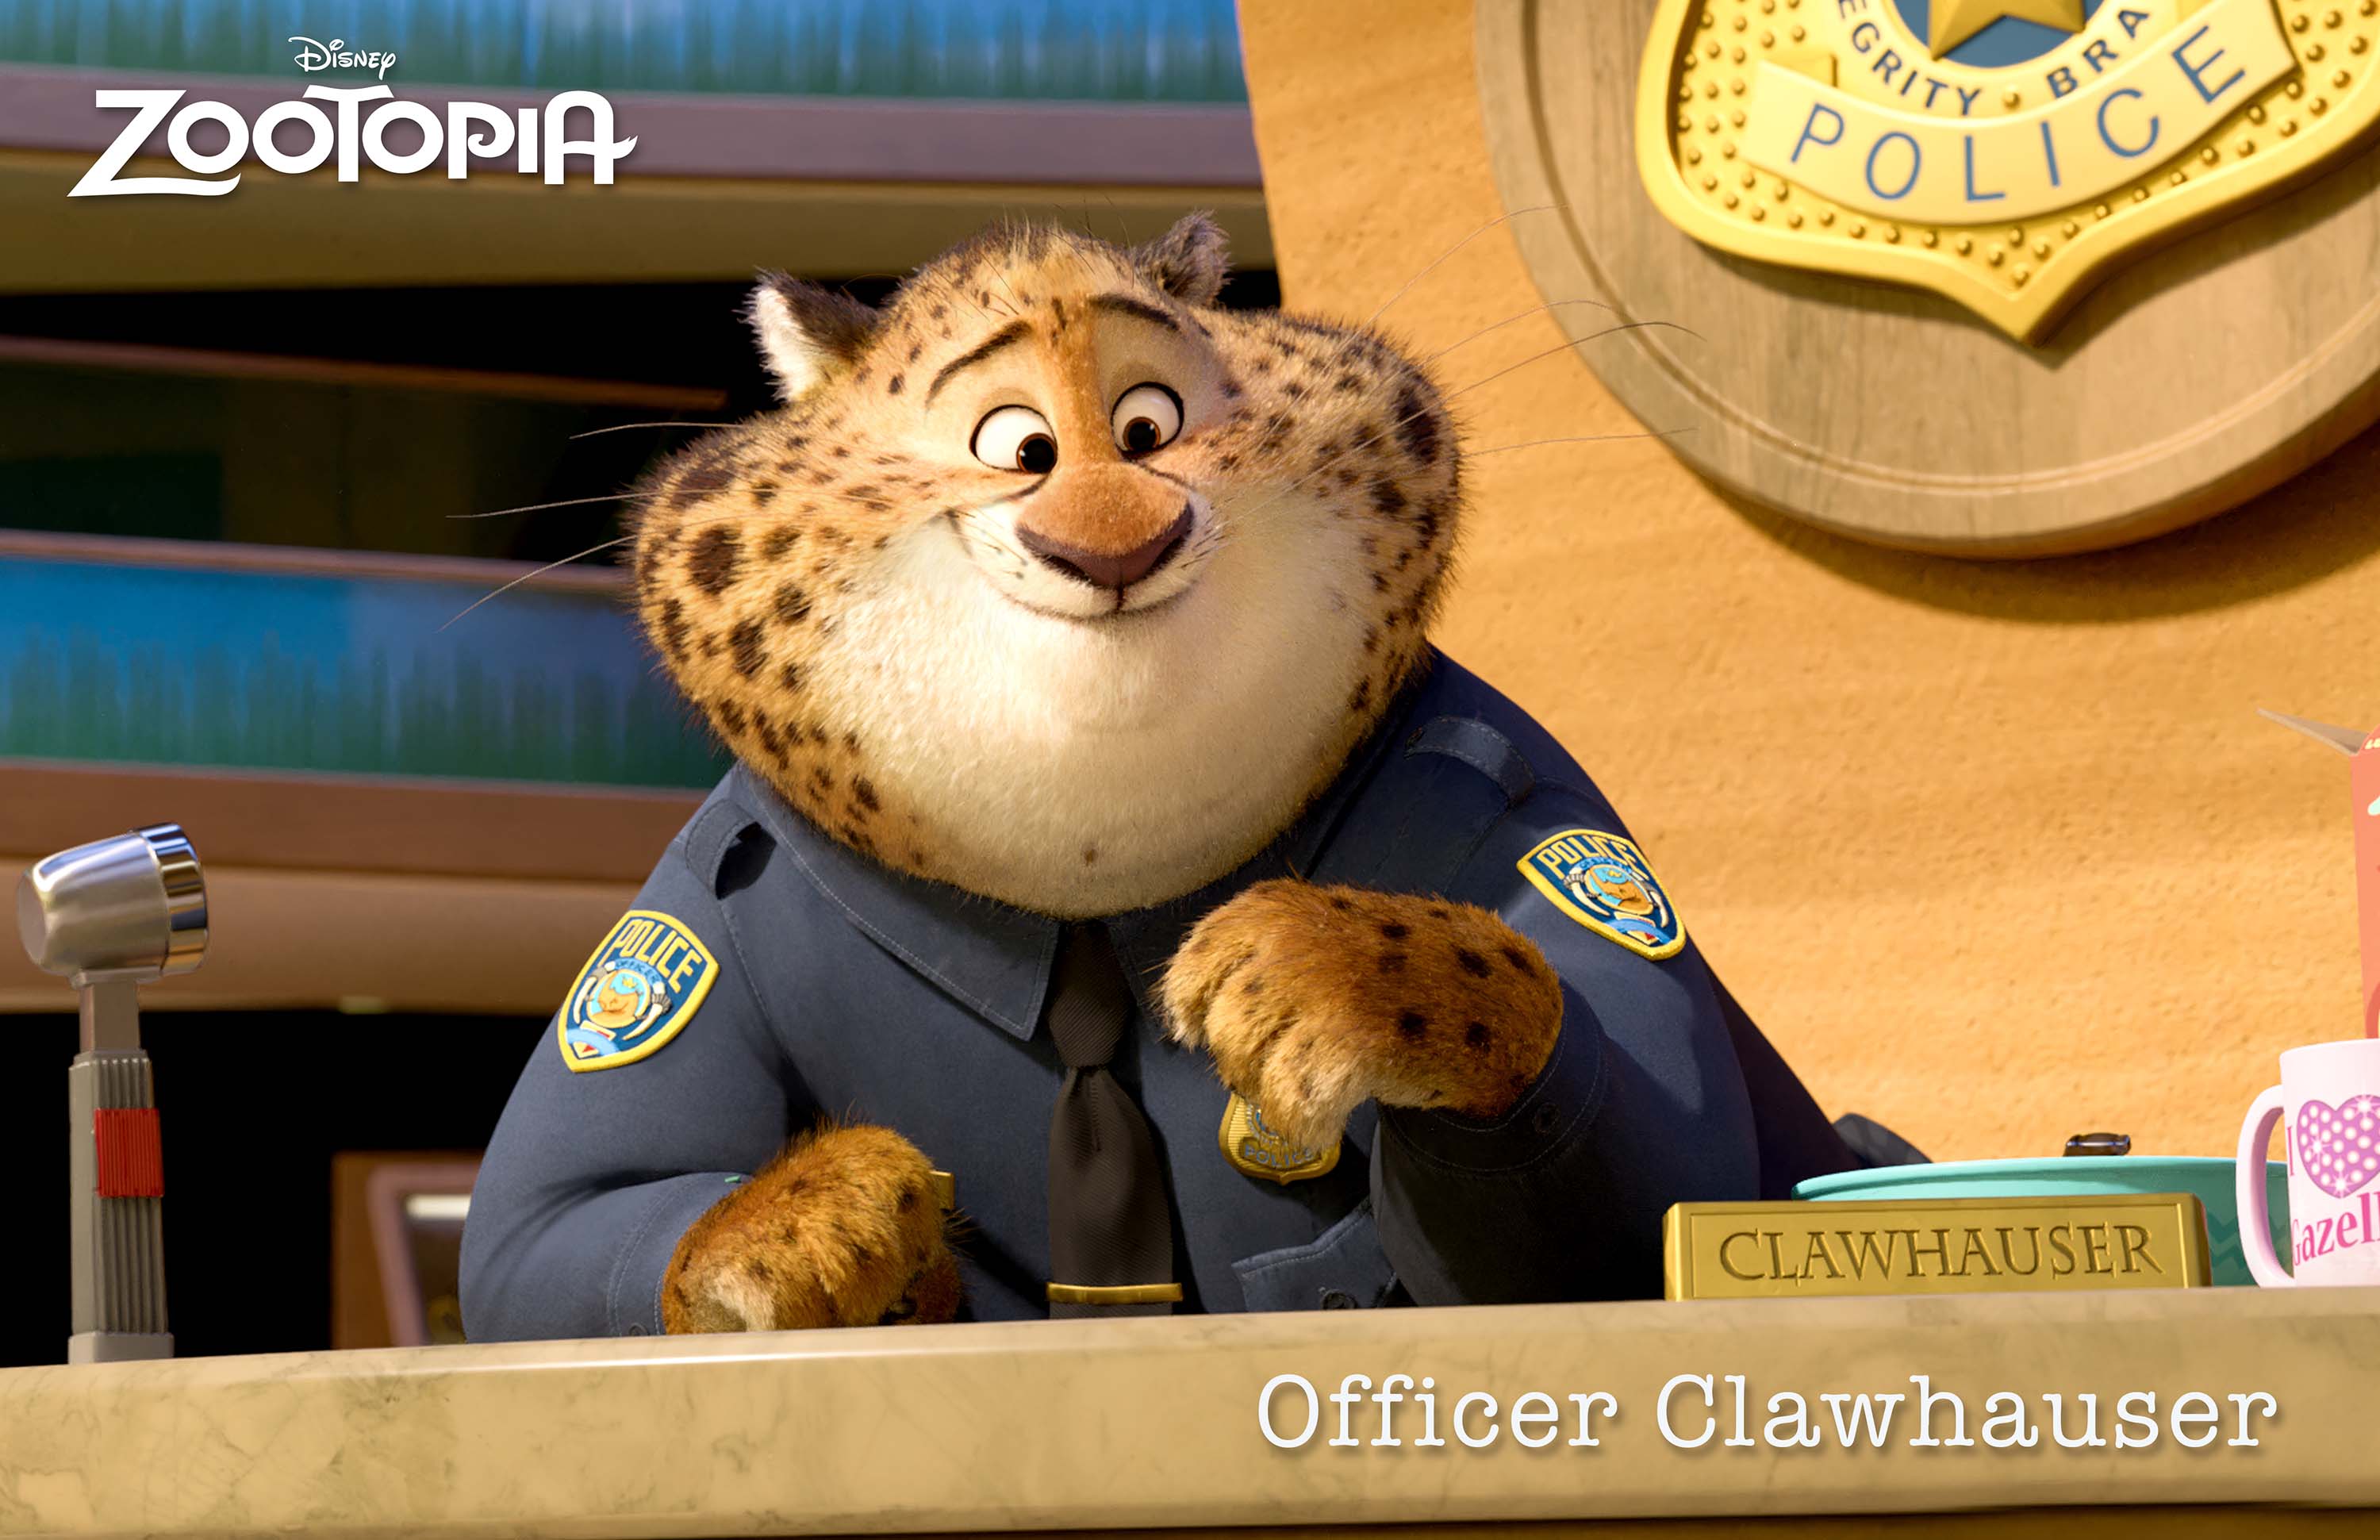 ZOOTOPIA â€“ The Zootopia Police Department’s most charming cheetah, BENJAMIN CLAWHAUSER. Clawhauser loves two things: pop star Gazelle and donuts. From his reception desk, he greets everyone with a warm smile and a helpful pawâ€”covered in sprinkles. Â©2015 Disney. All Rights Reserved.